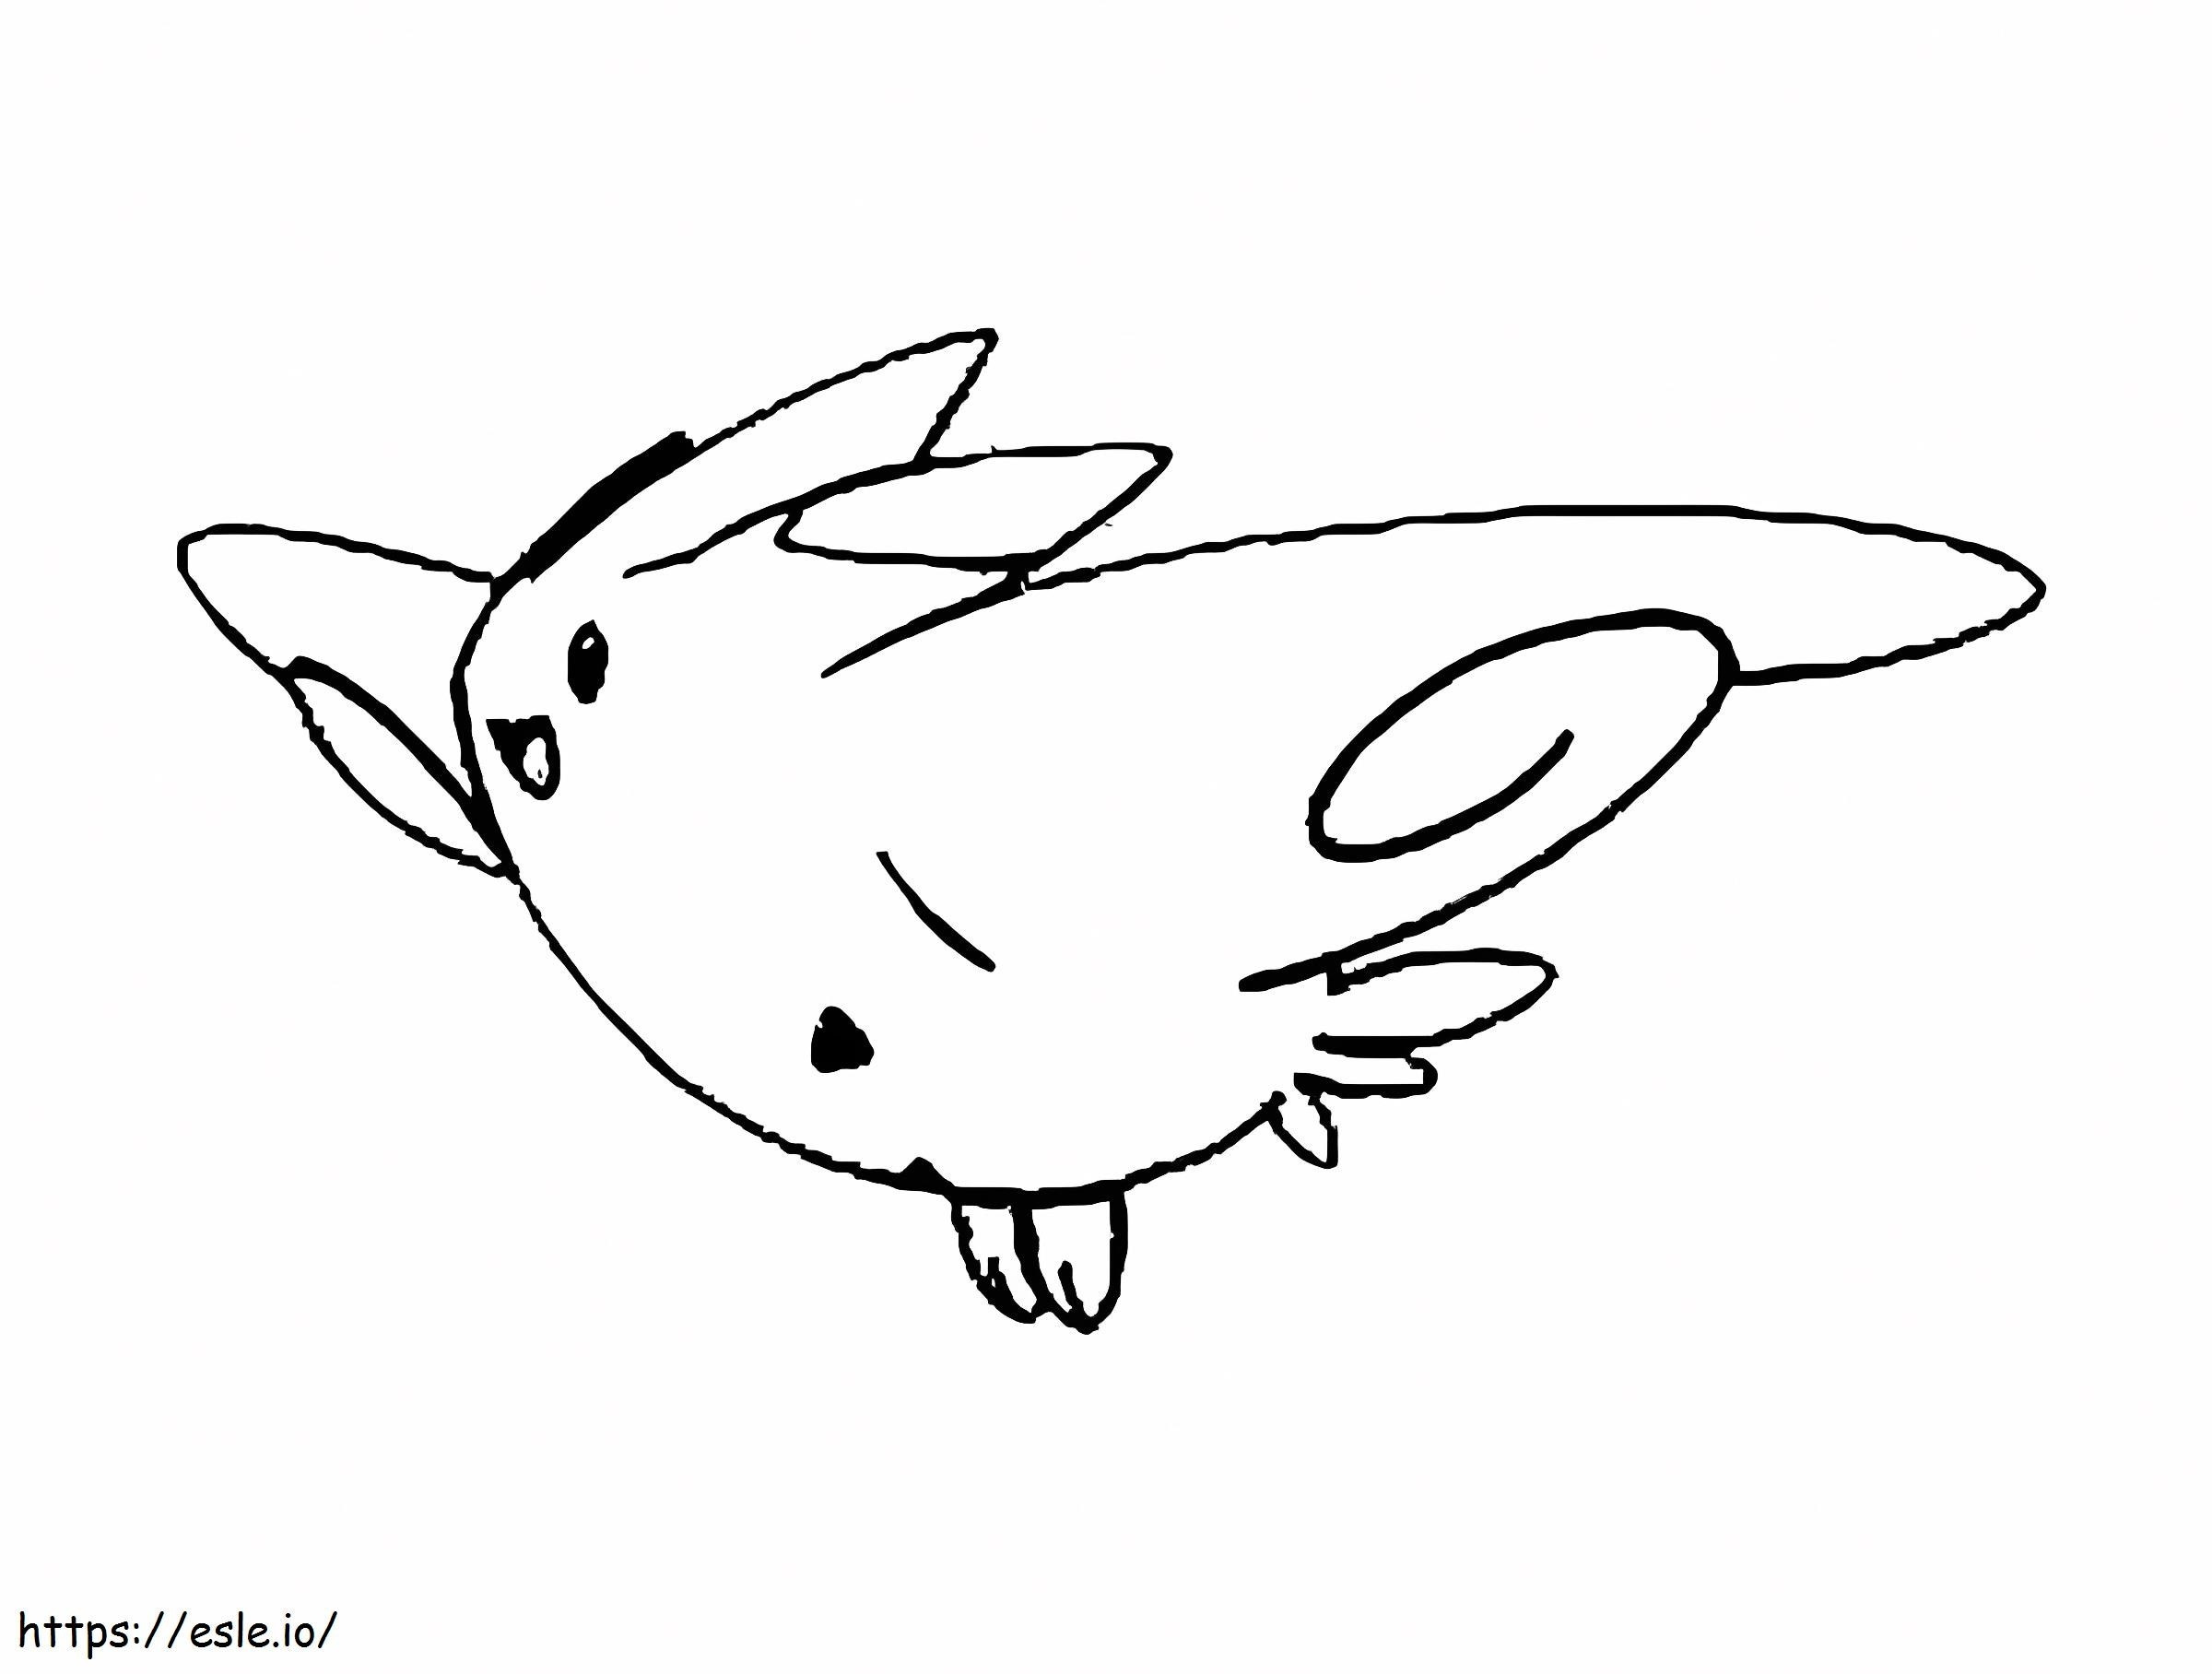 Togekiss Gen 4 Pokemon coloring page